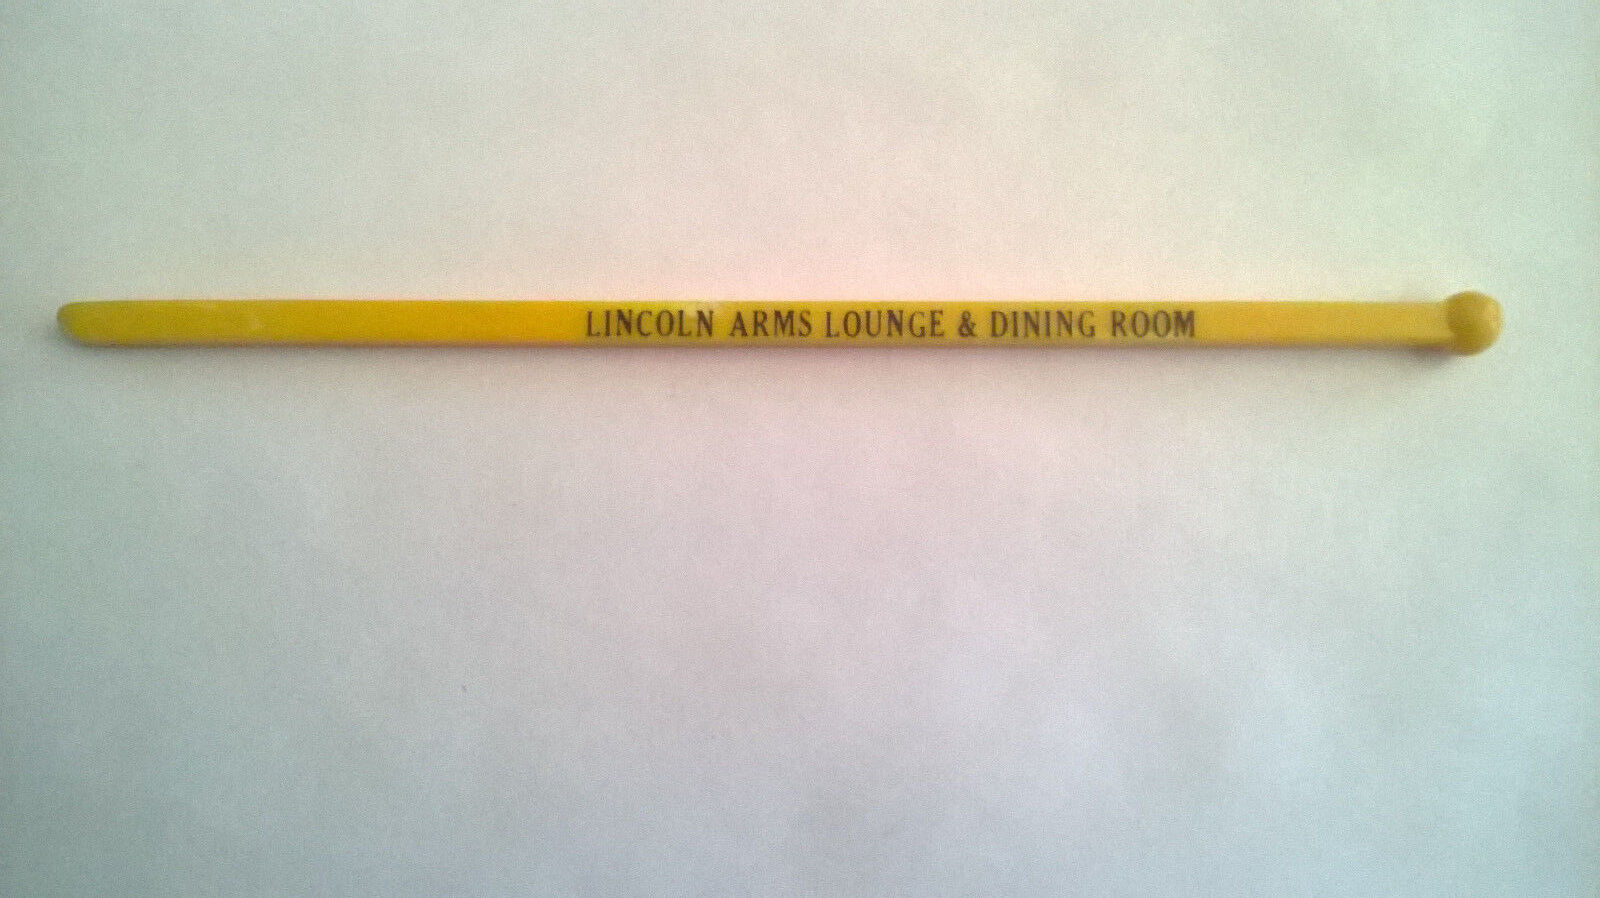 Lincoln Arms Lounge & Dining Room Swizzle Stick Drink Stirrer Yellow Plastic